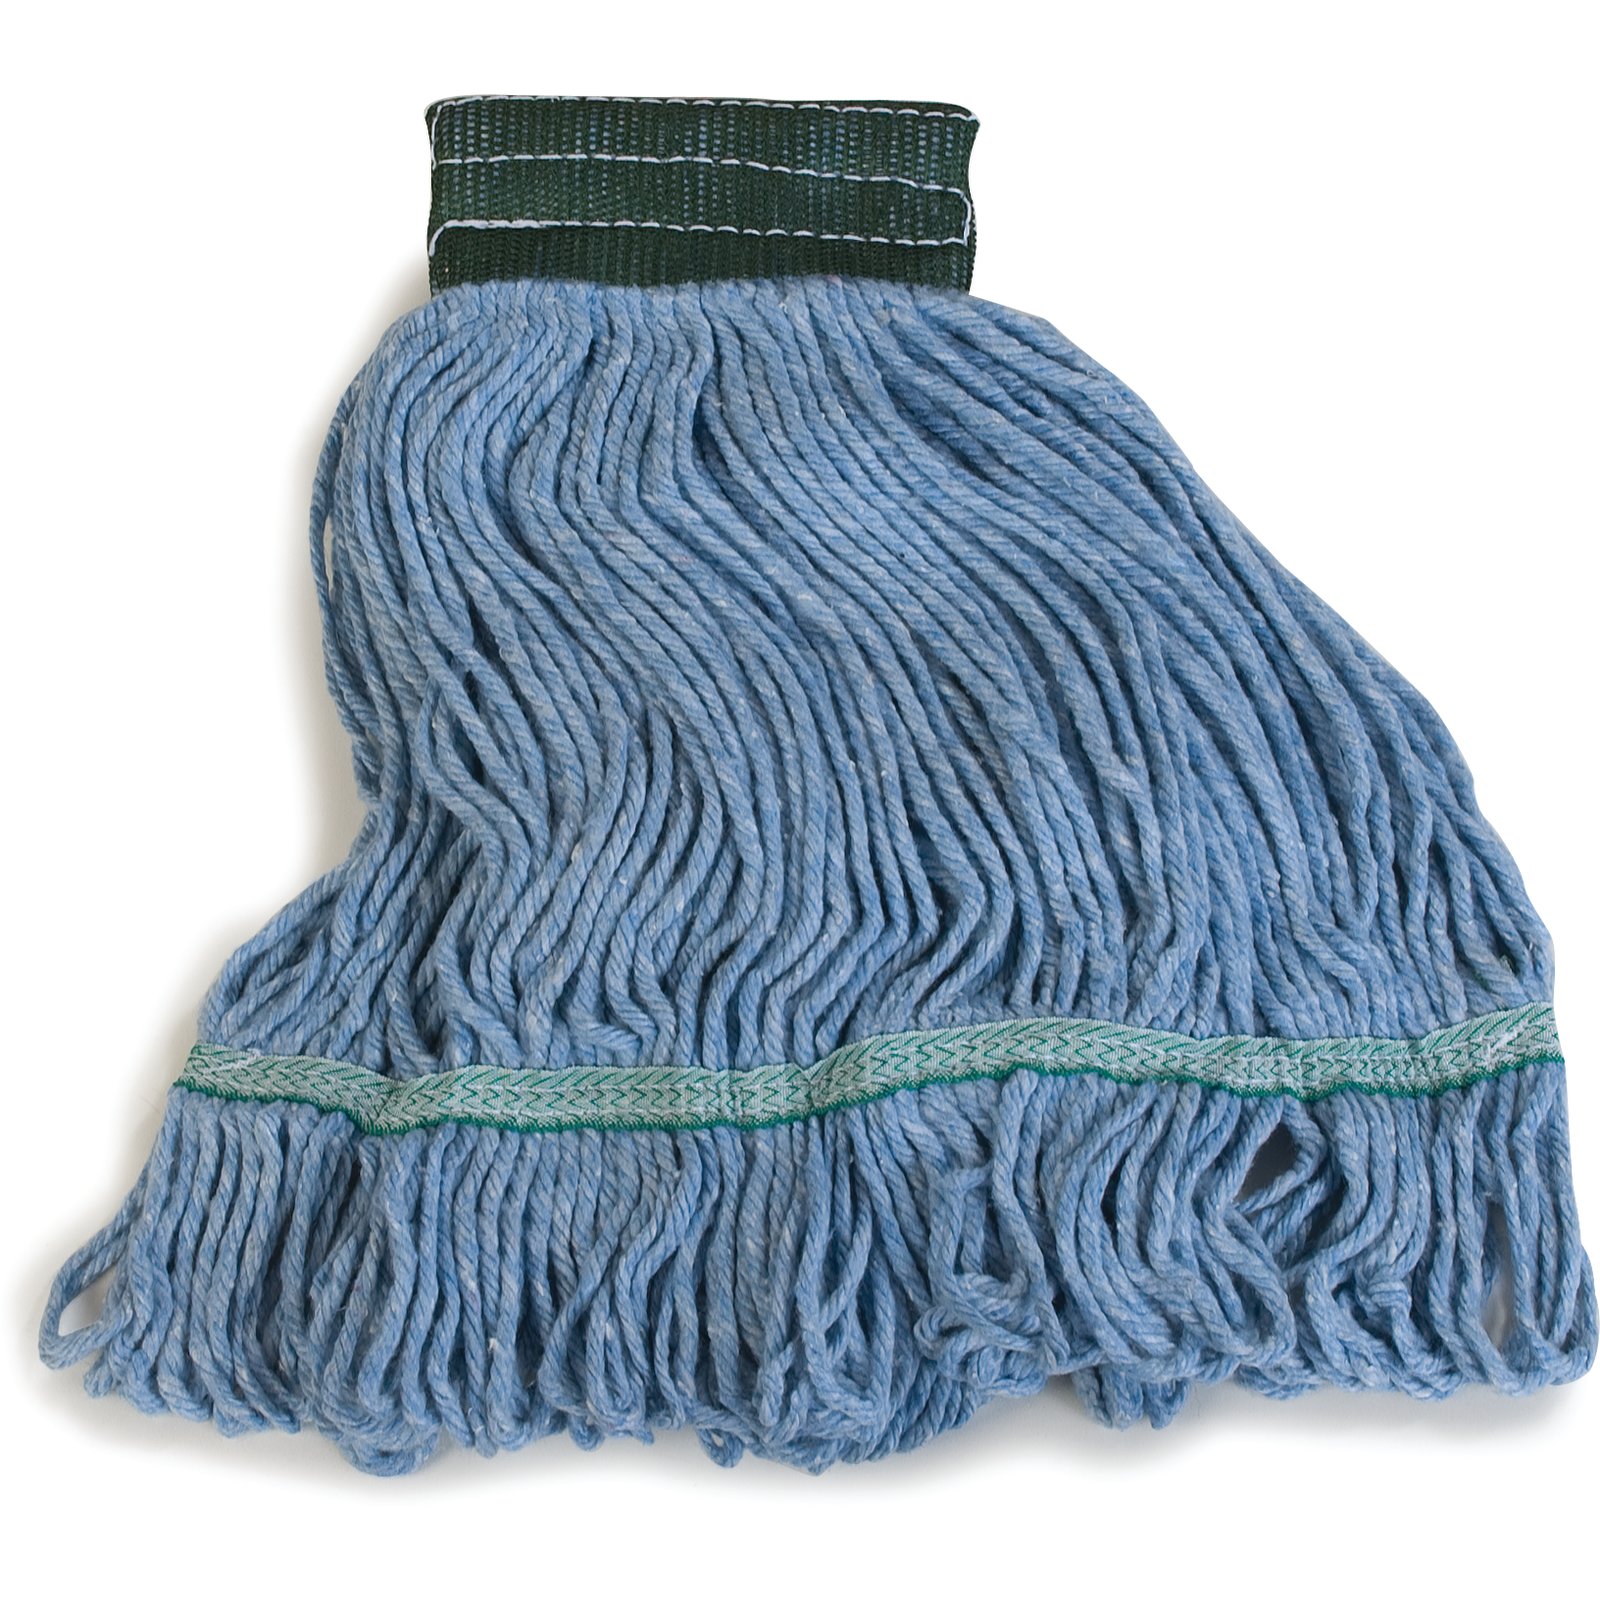 Carlisle 369448B14 Looped-End Mop Head With Green Band Medium Blue Pack of 12 